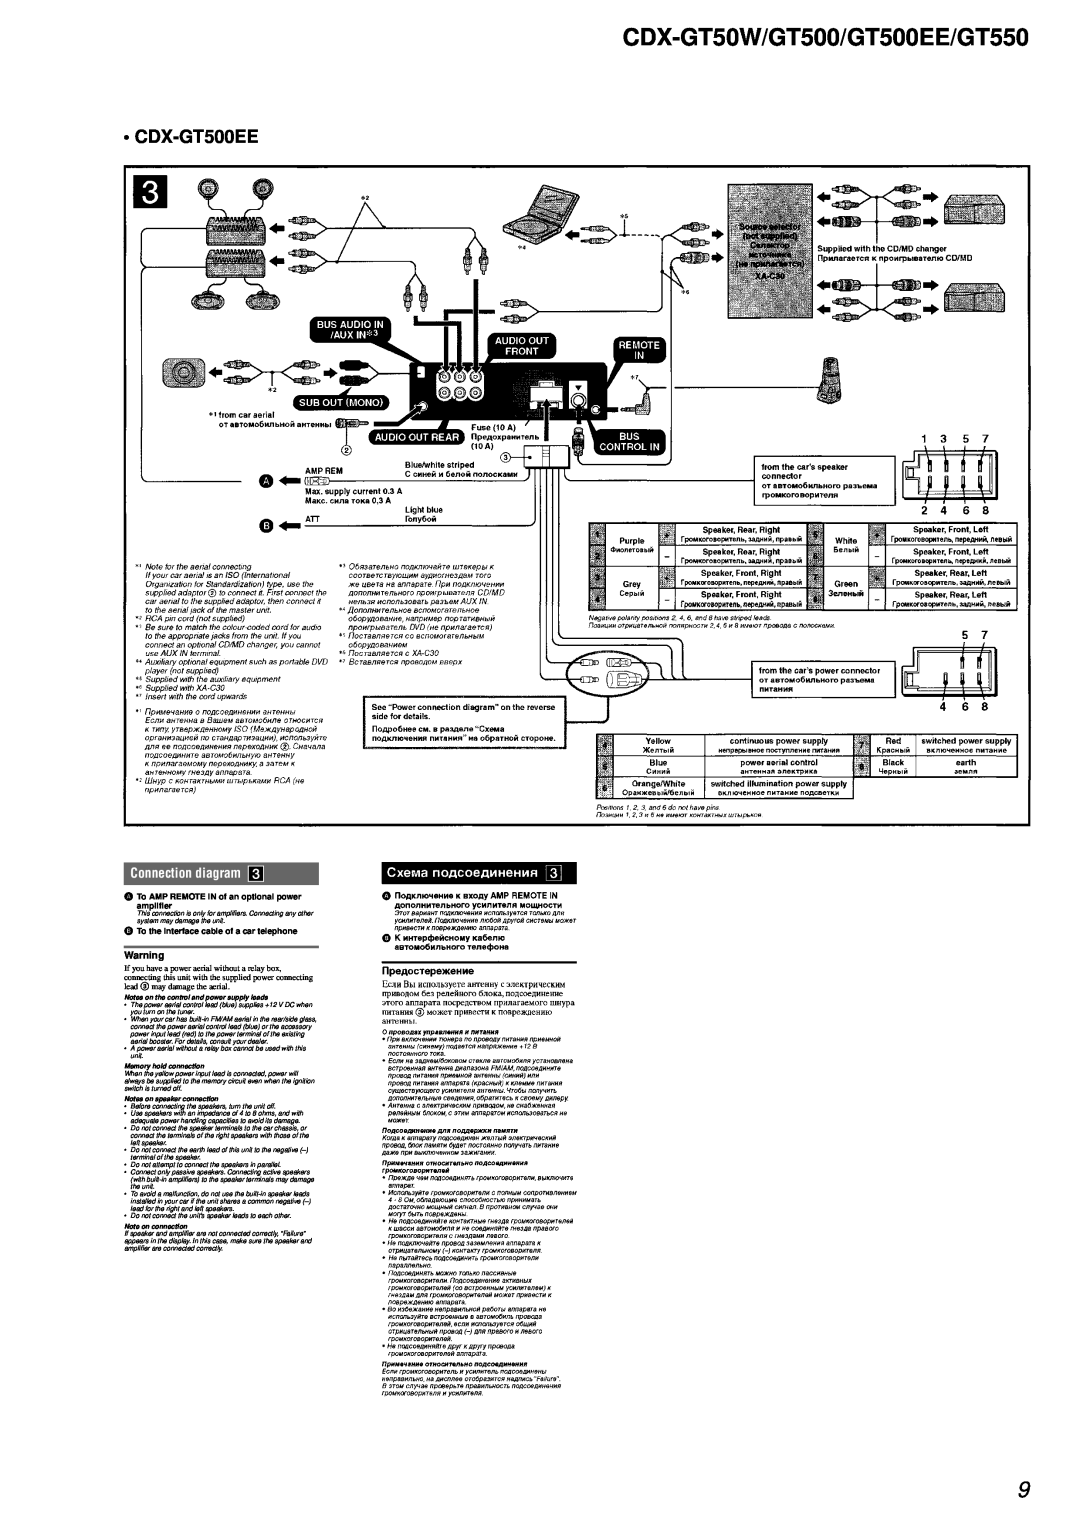 Sony CDX-GT50W/GT500/GT500EE/GT550, CDX-GT500EE, Connection diagram, ATo AMP REMOTE IN of an optional power amplifier 